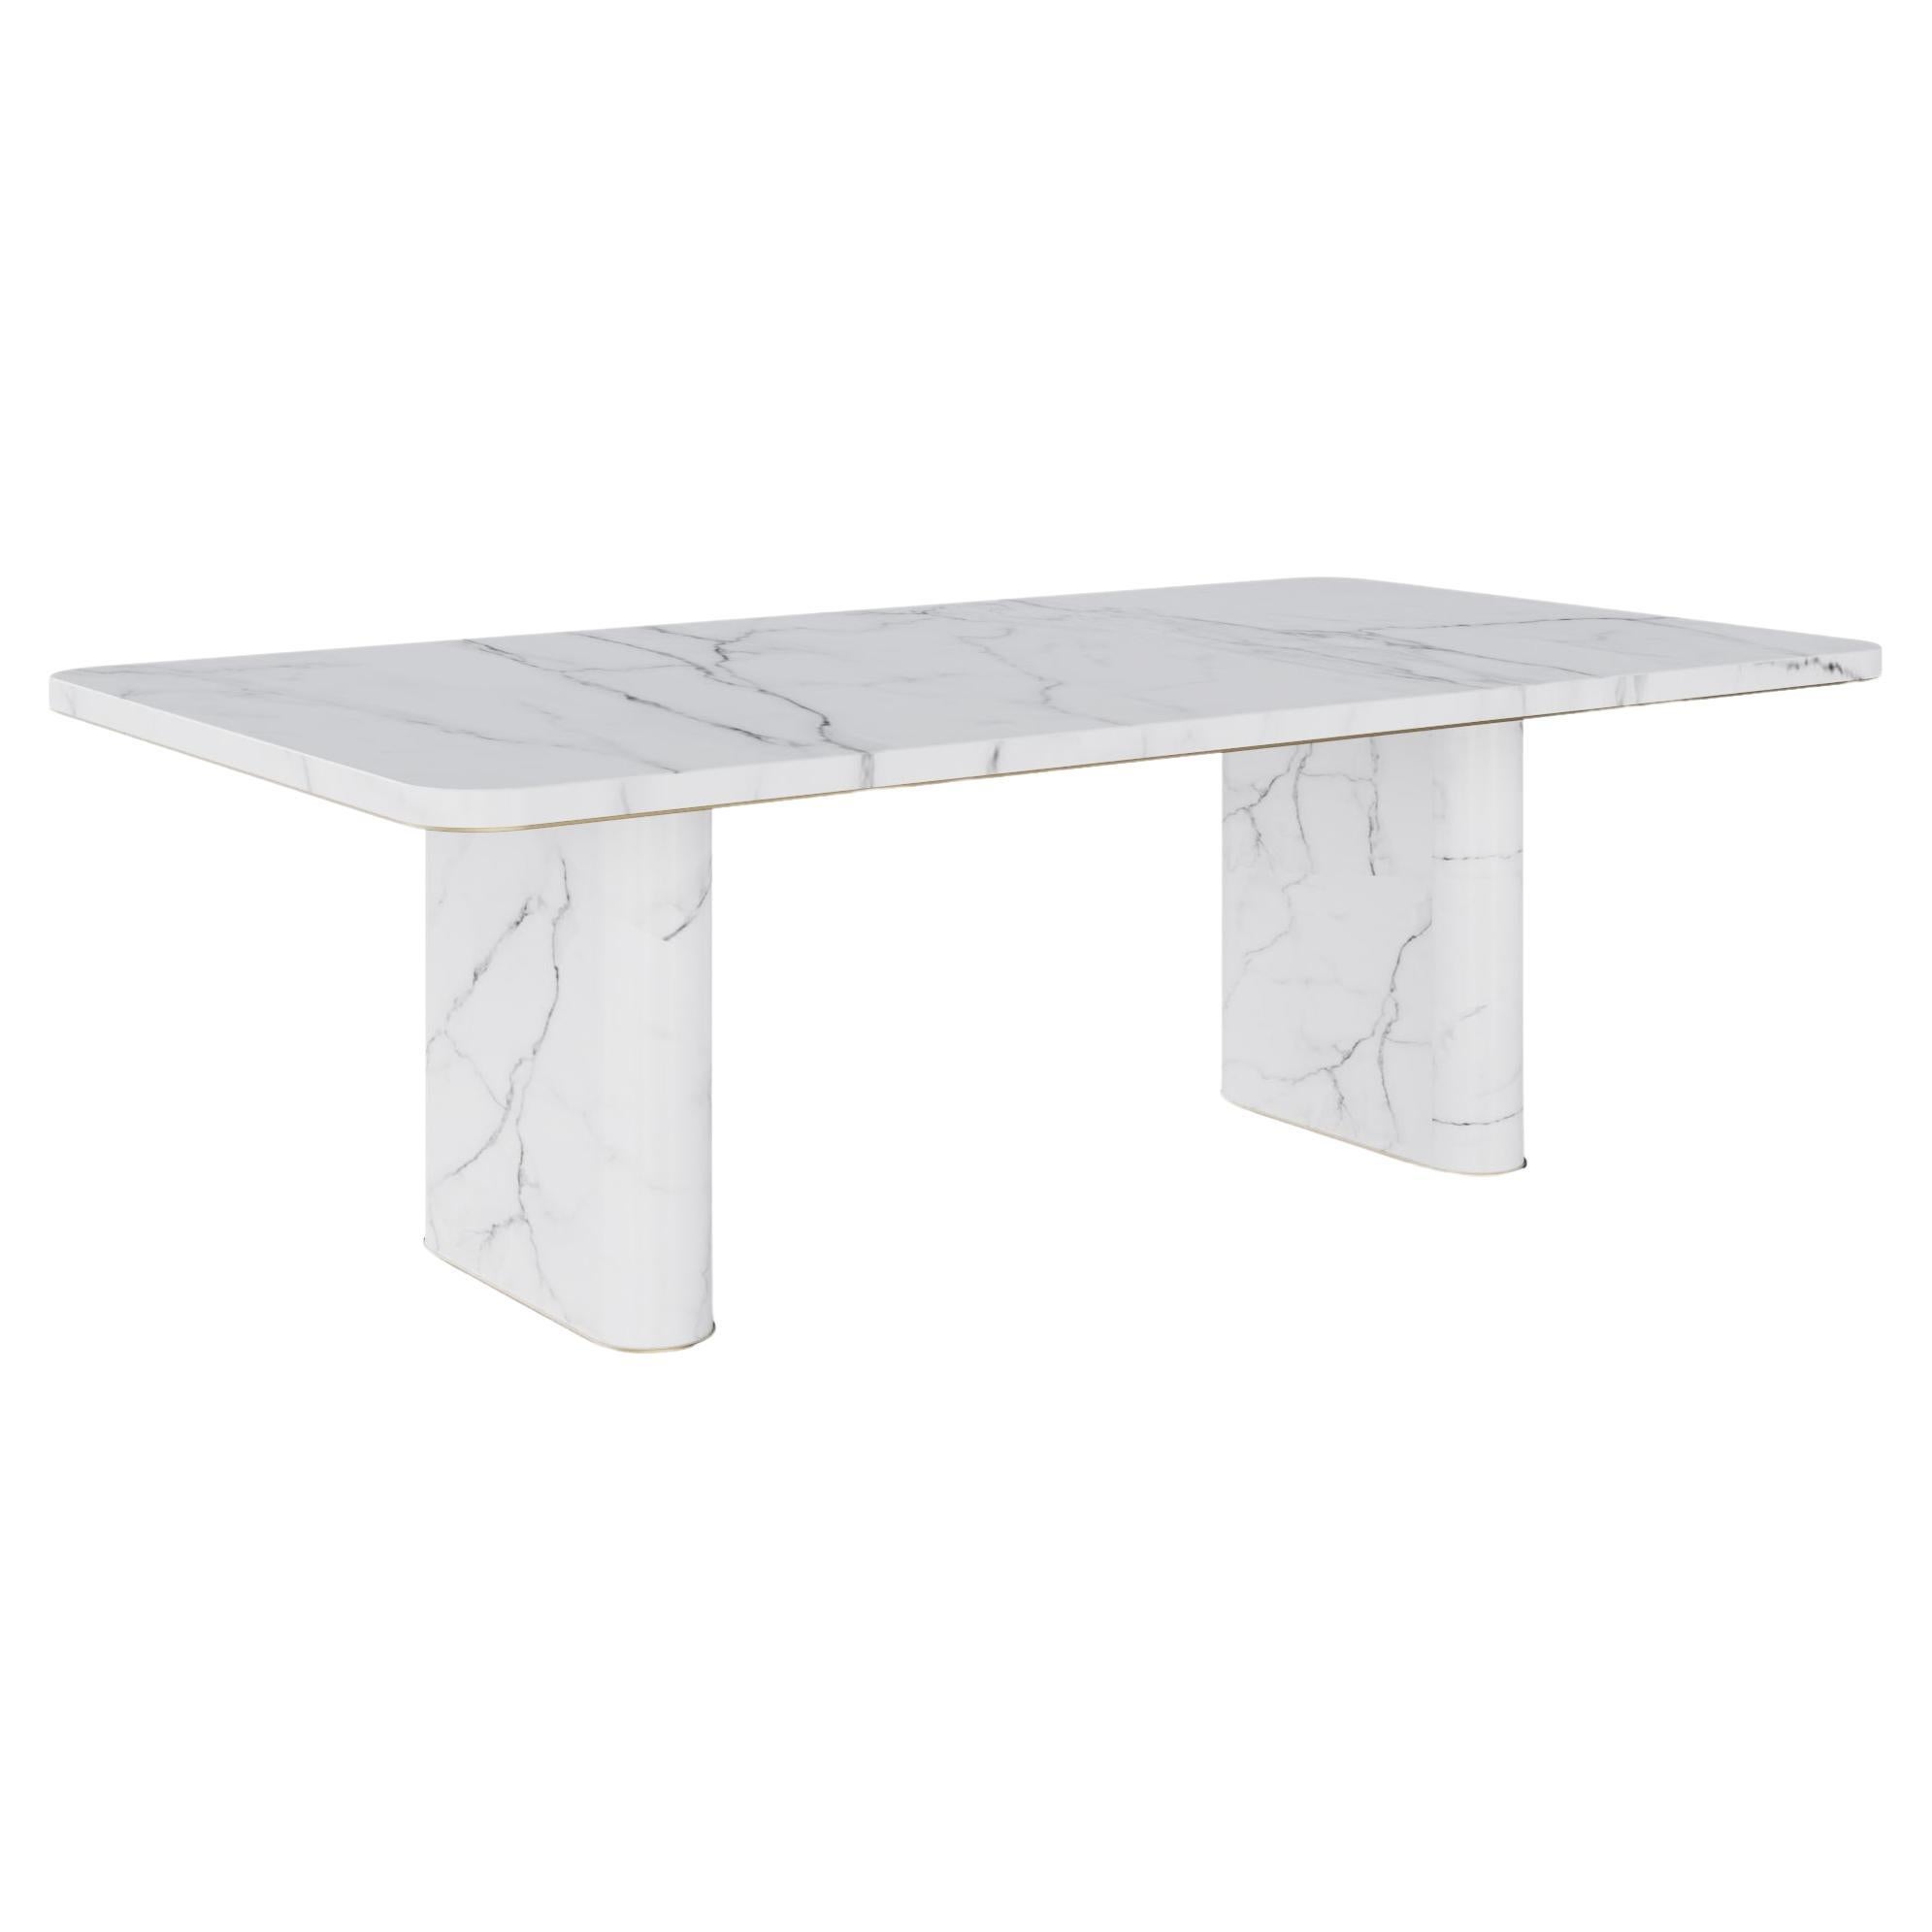 Modern Fall Dining Table Calacatta Marble Handmade in Portugal by Greenapple